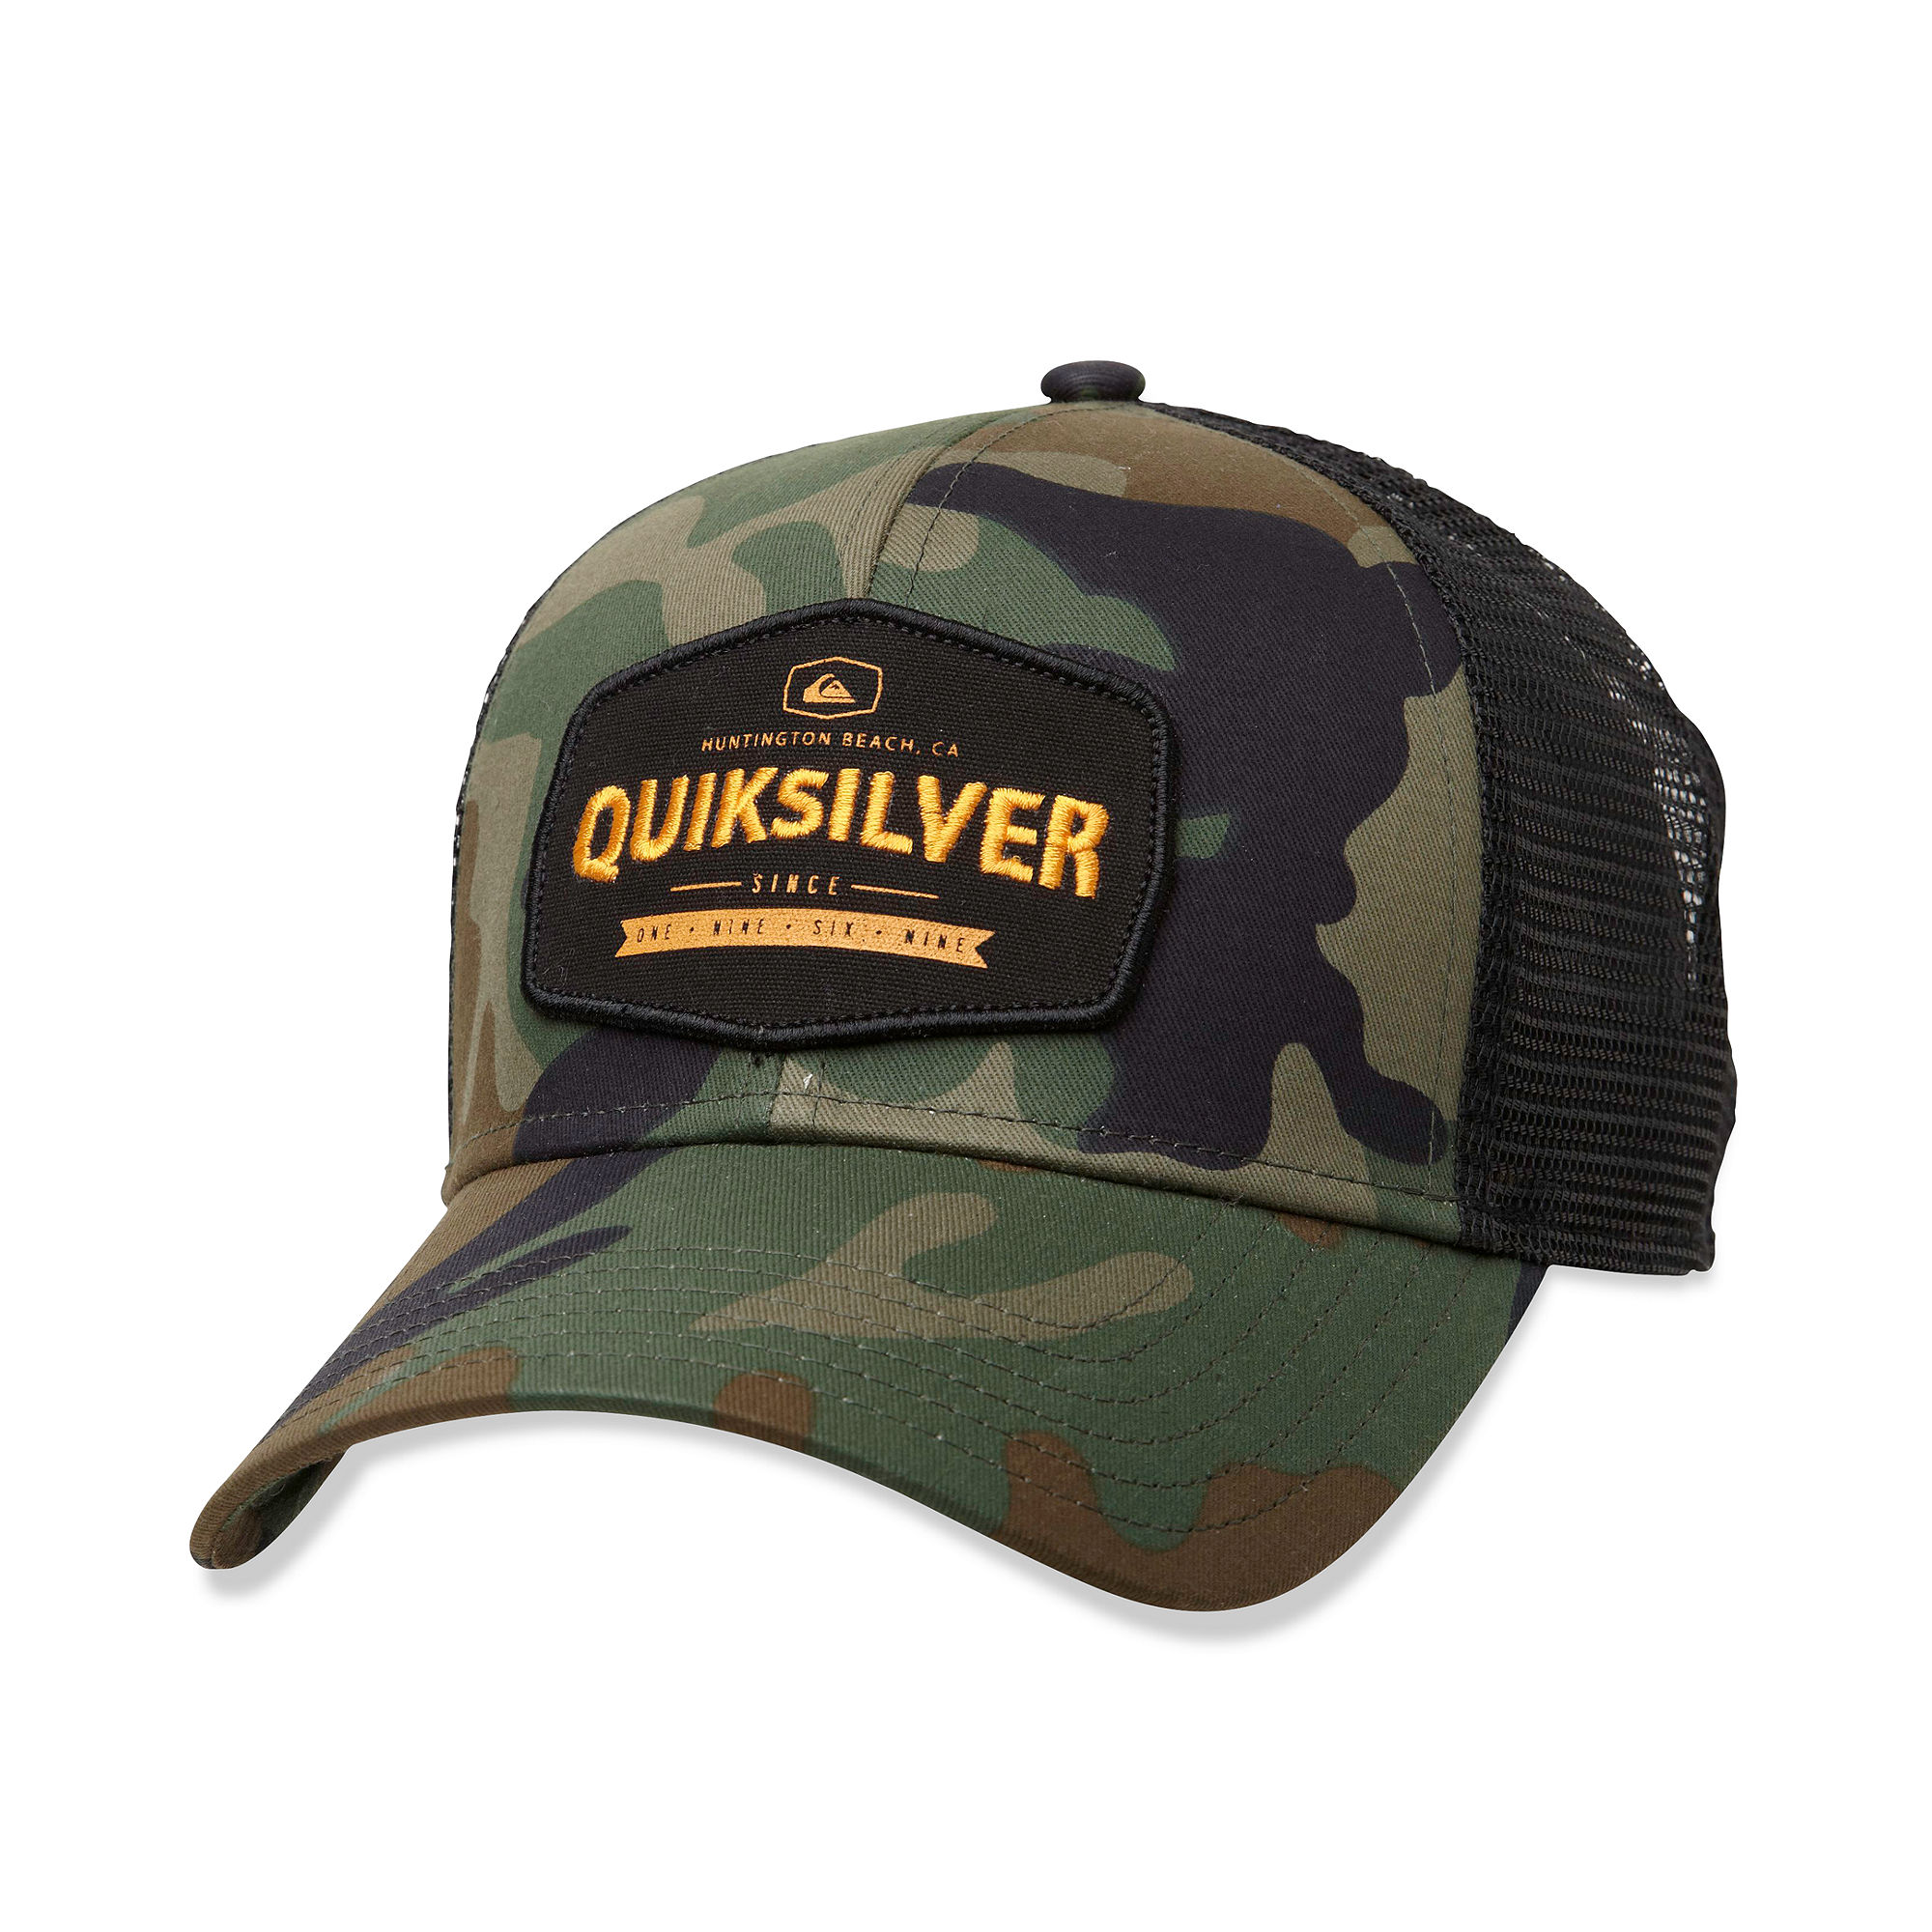 Lyst Quiksilver  Please Hold Graphic Trucker Hat in Green 